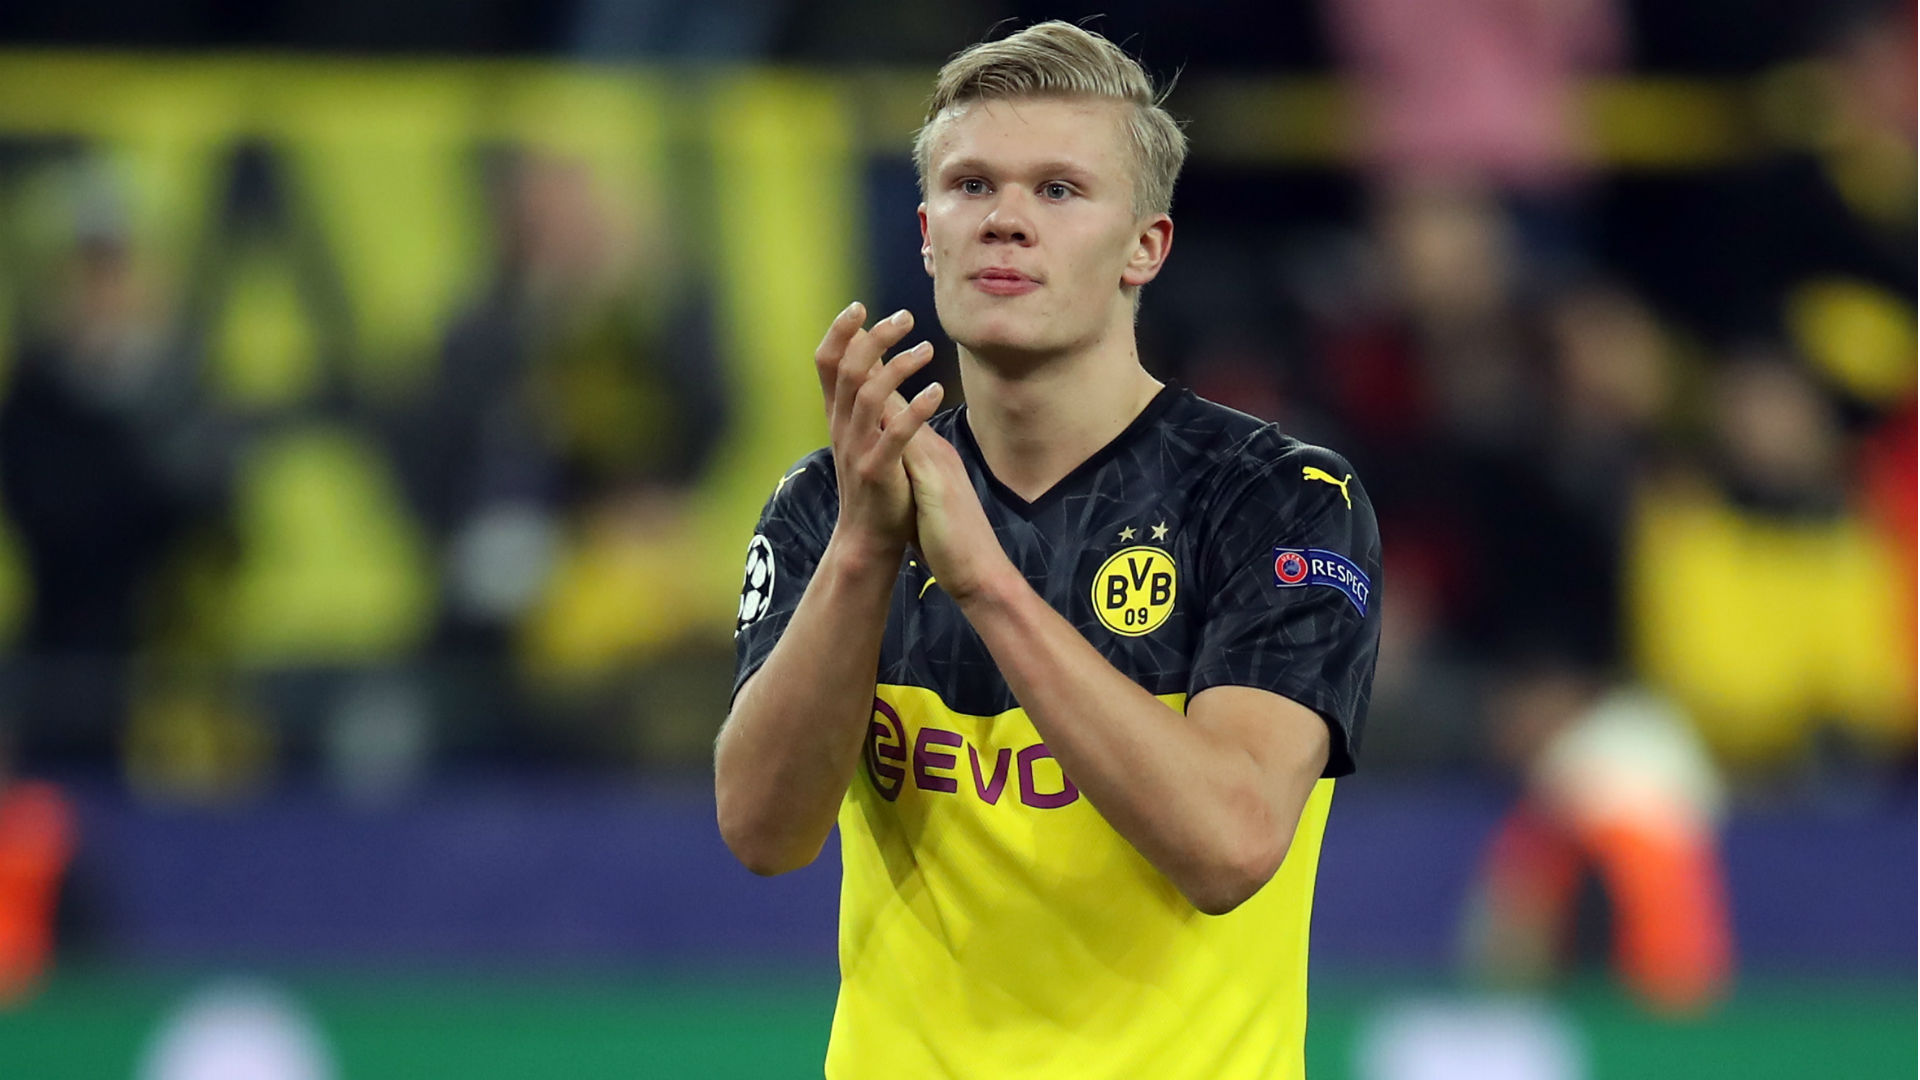 Following his stunning start at Borussia Dortmund, Erling Haaland's approach to training has been applauded by Lucien Favre.